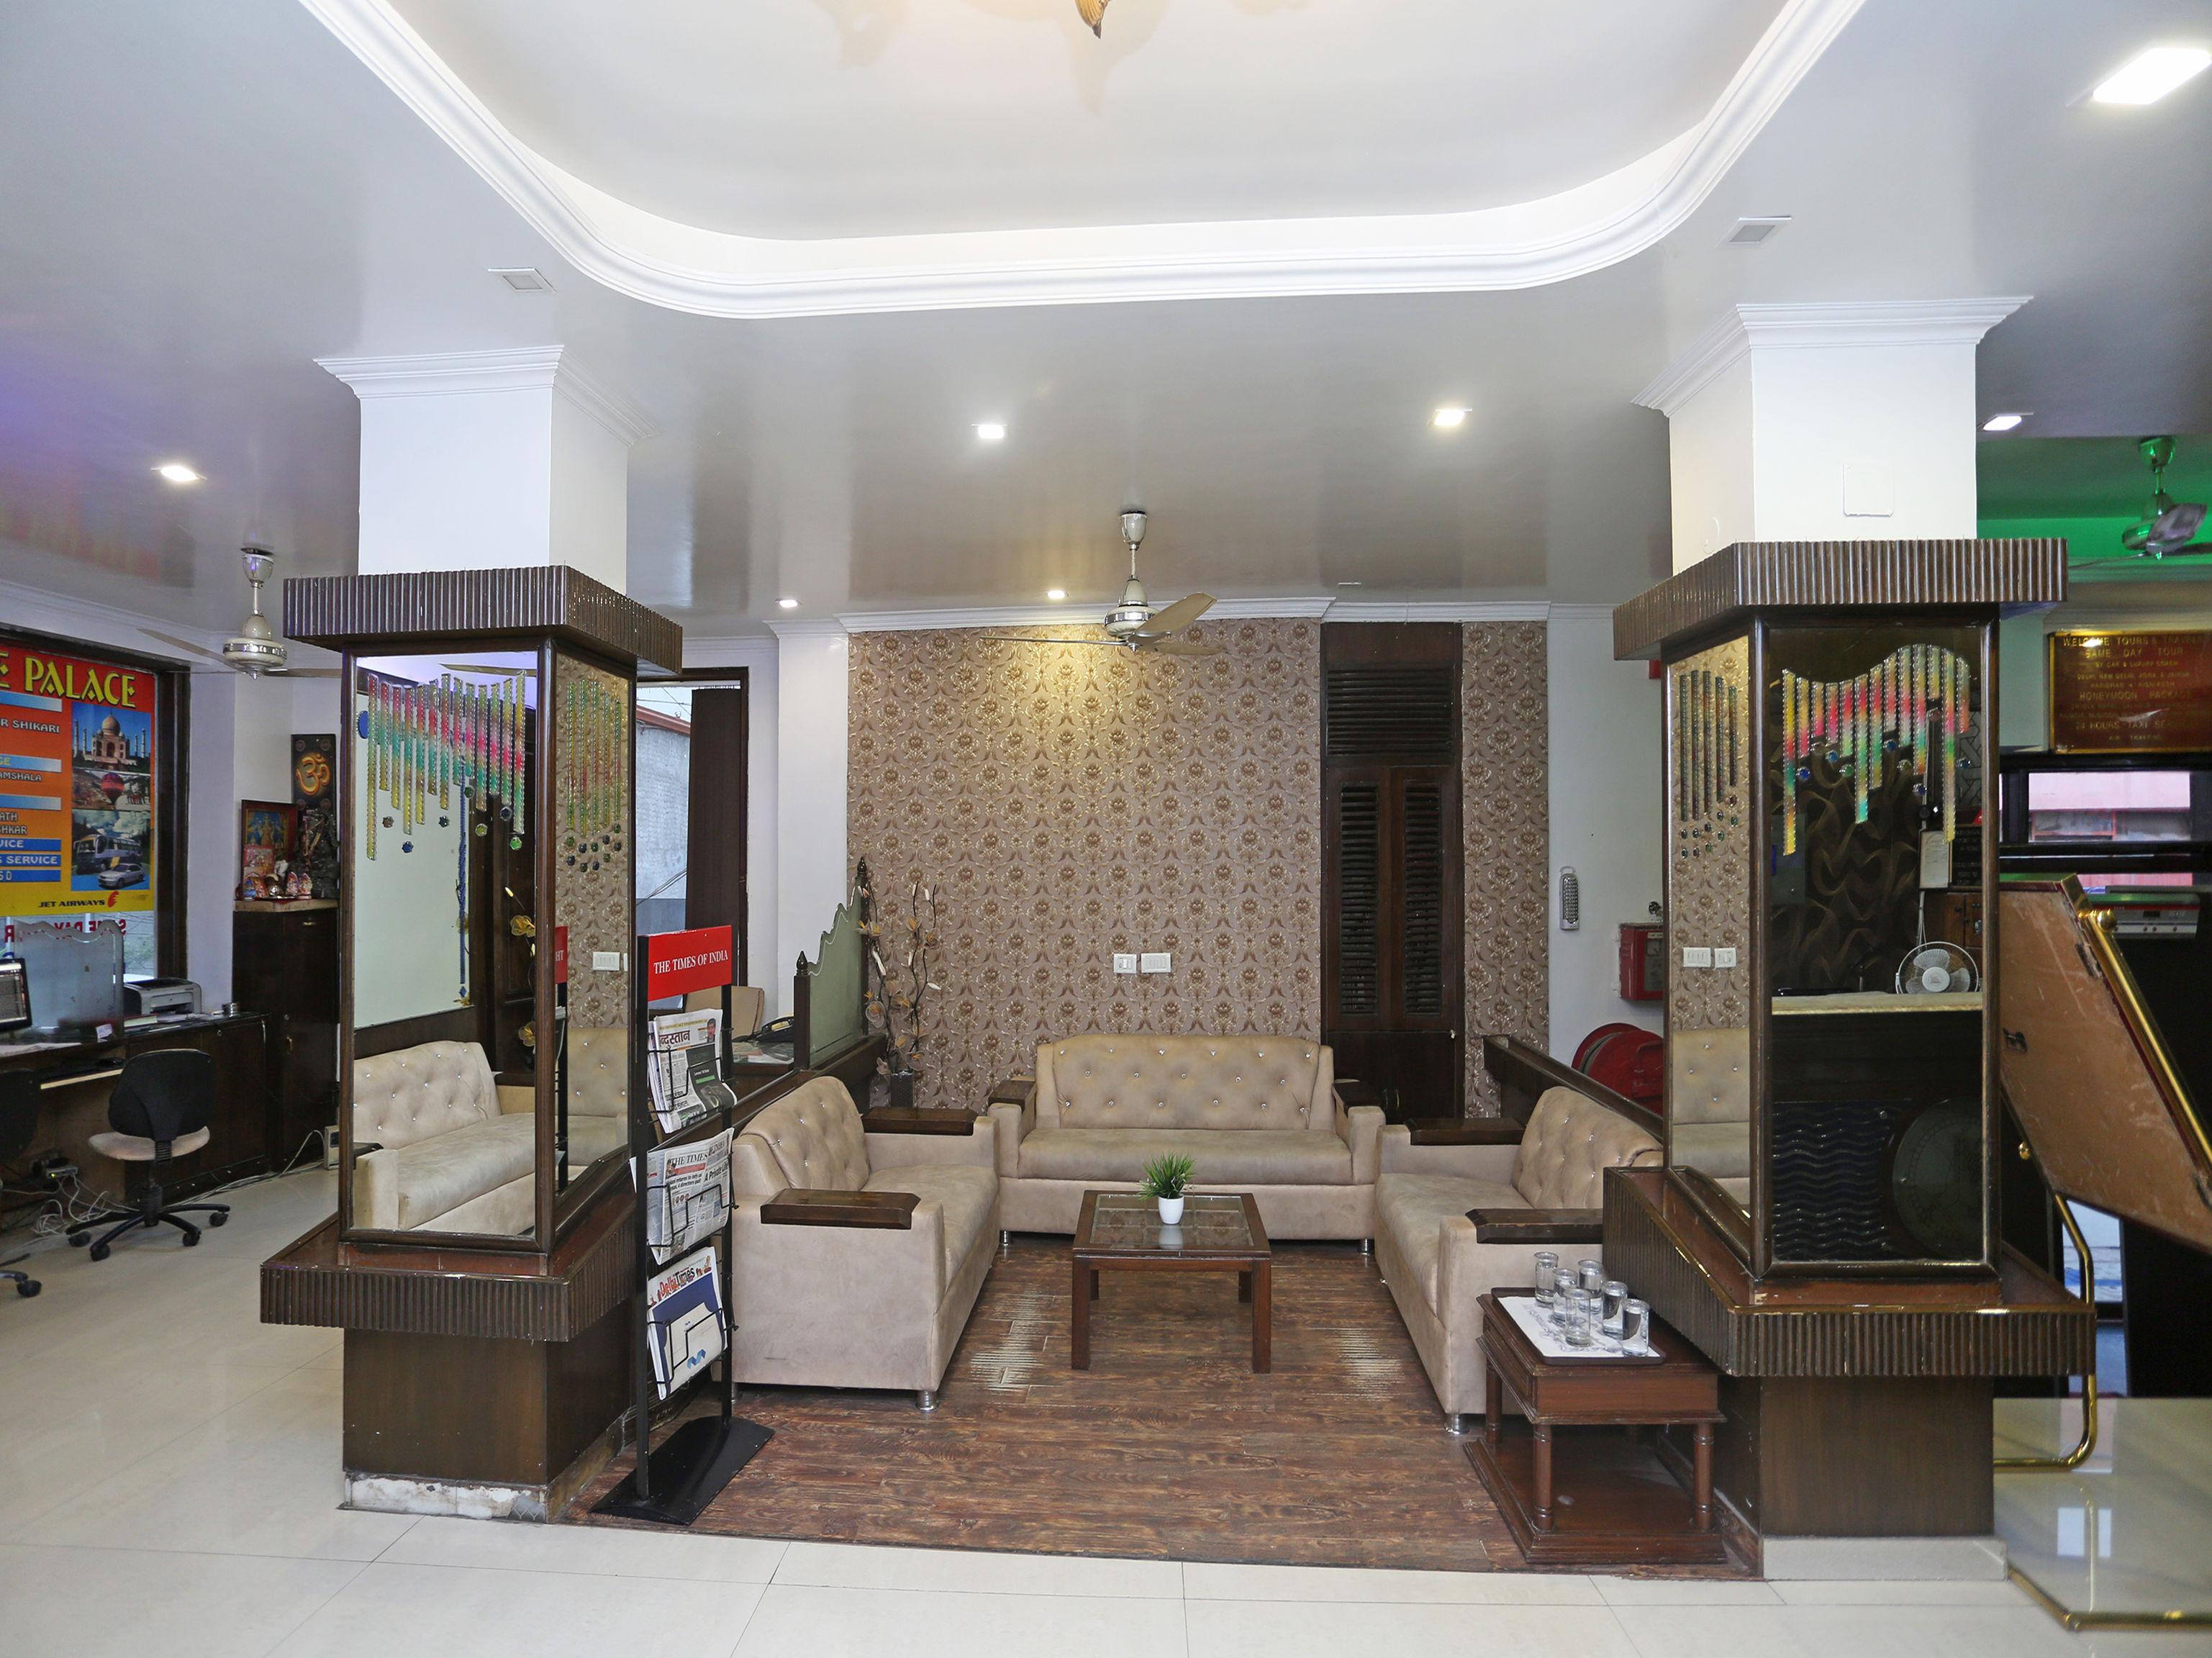 Fabexpress Welcome Palace Near New Delhi Railway Station Extérieur photo